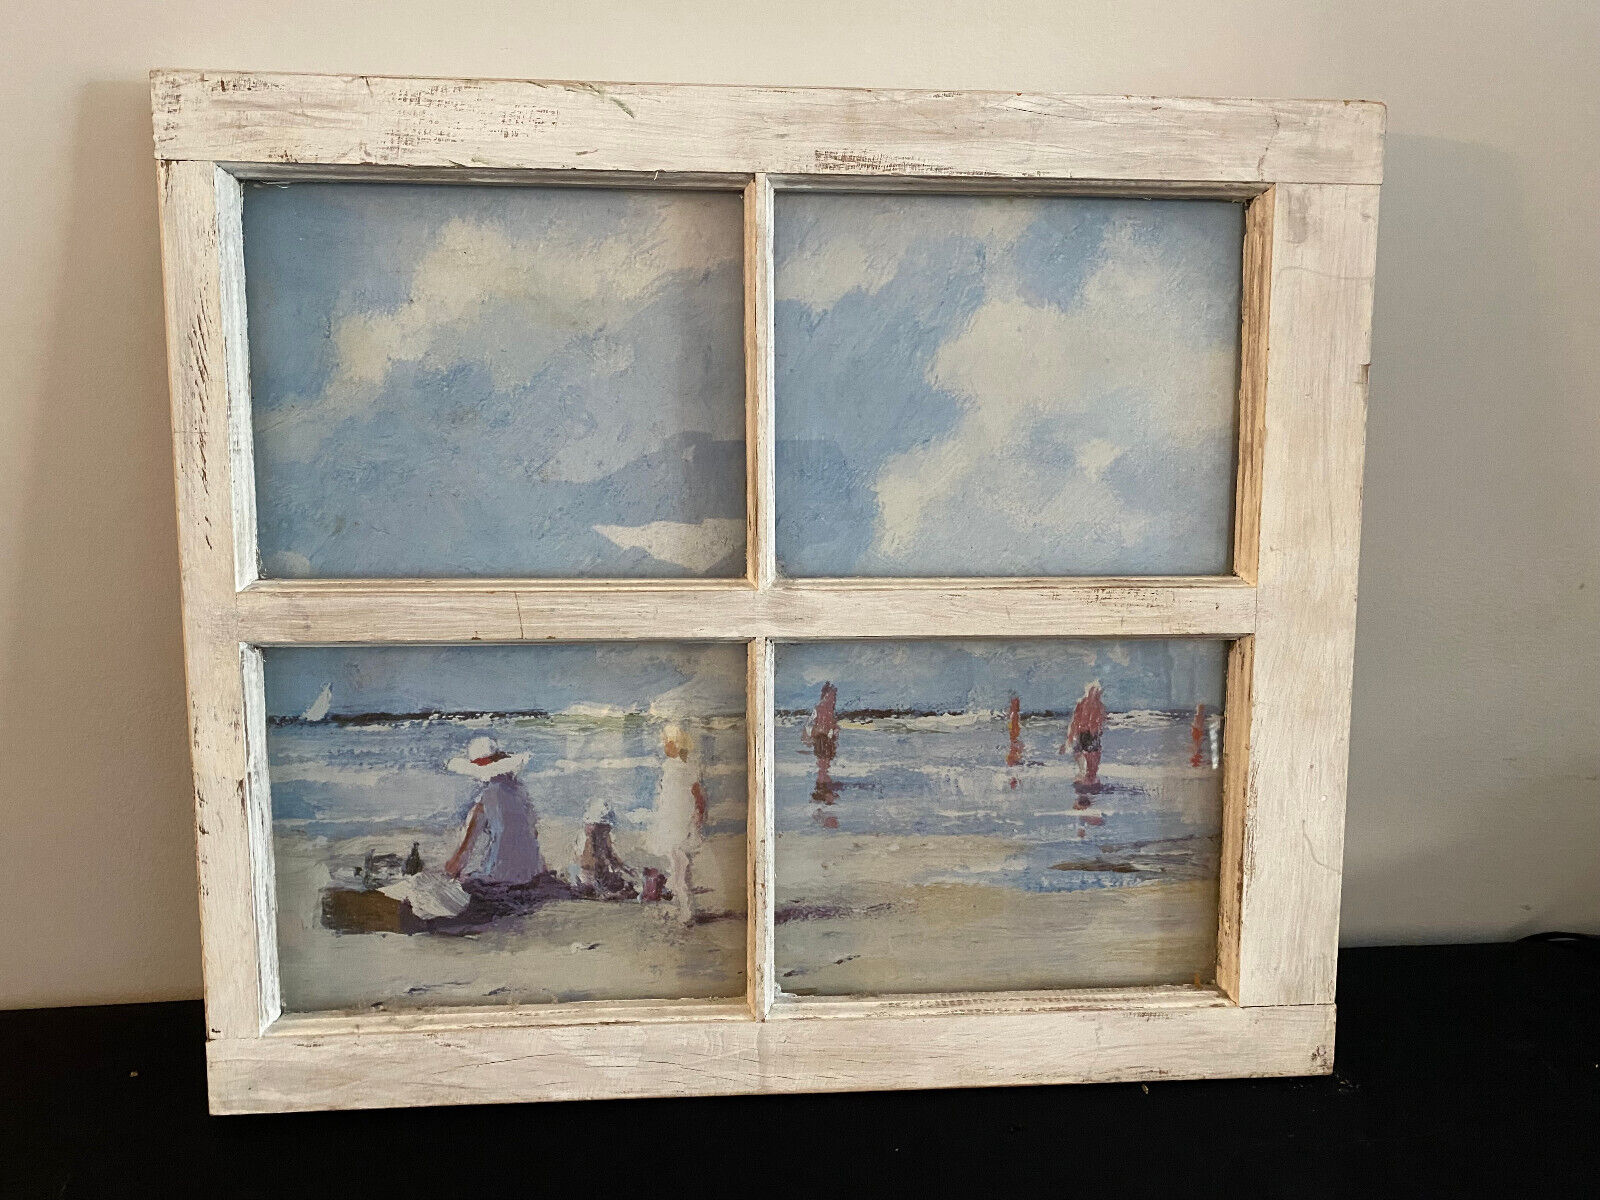 Vintage Whitewashed Window Frame with Classic Beach Scene